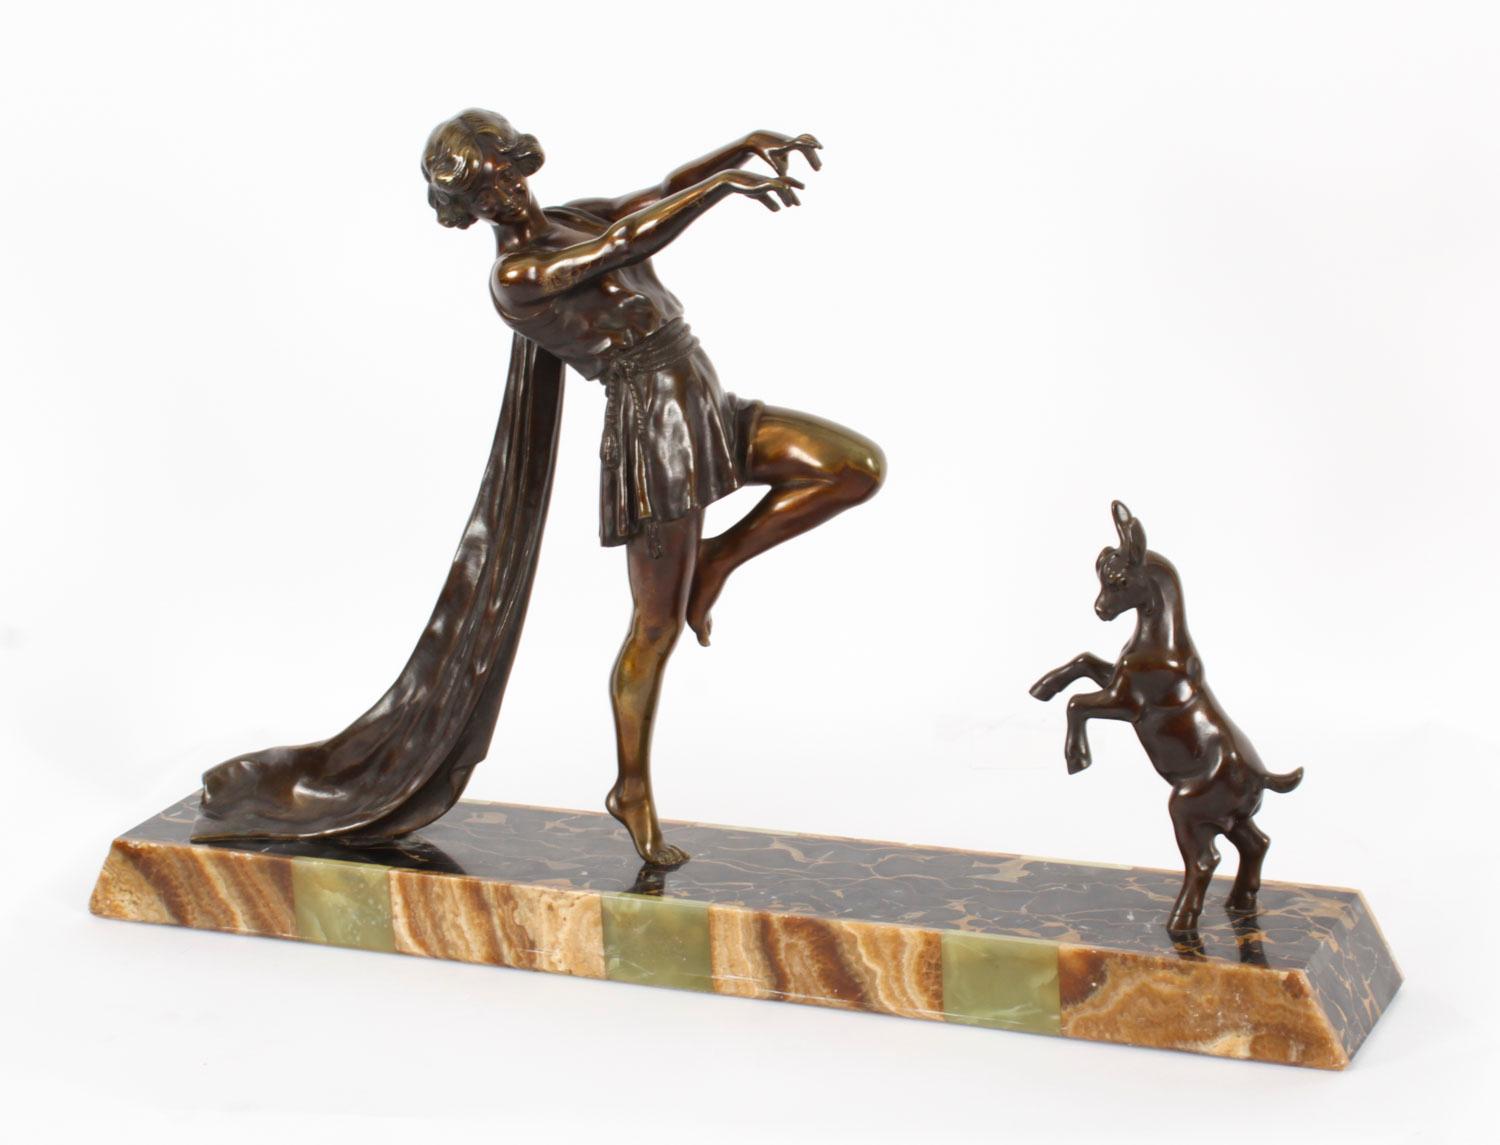 A large fine Art Deco patinated bronze and marble group of a toga dancer with a kid goat,  on a signed marble plinth,  by Emile Carlier,  (French 1849-1927),  Circa 1920 in date.

This powerful sculpture is modelled and cast as a  semi-clad female